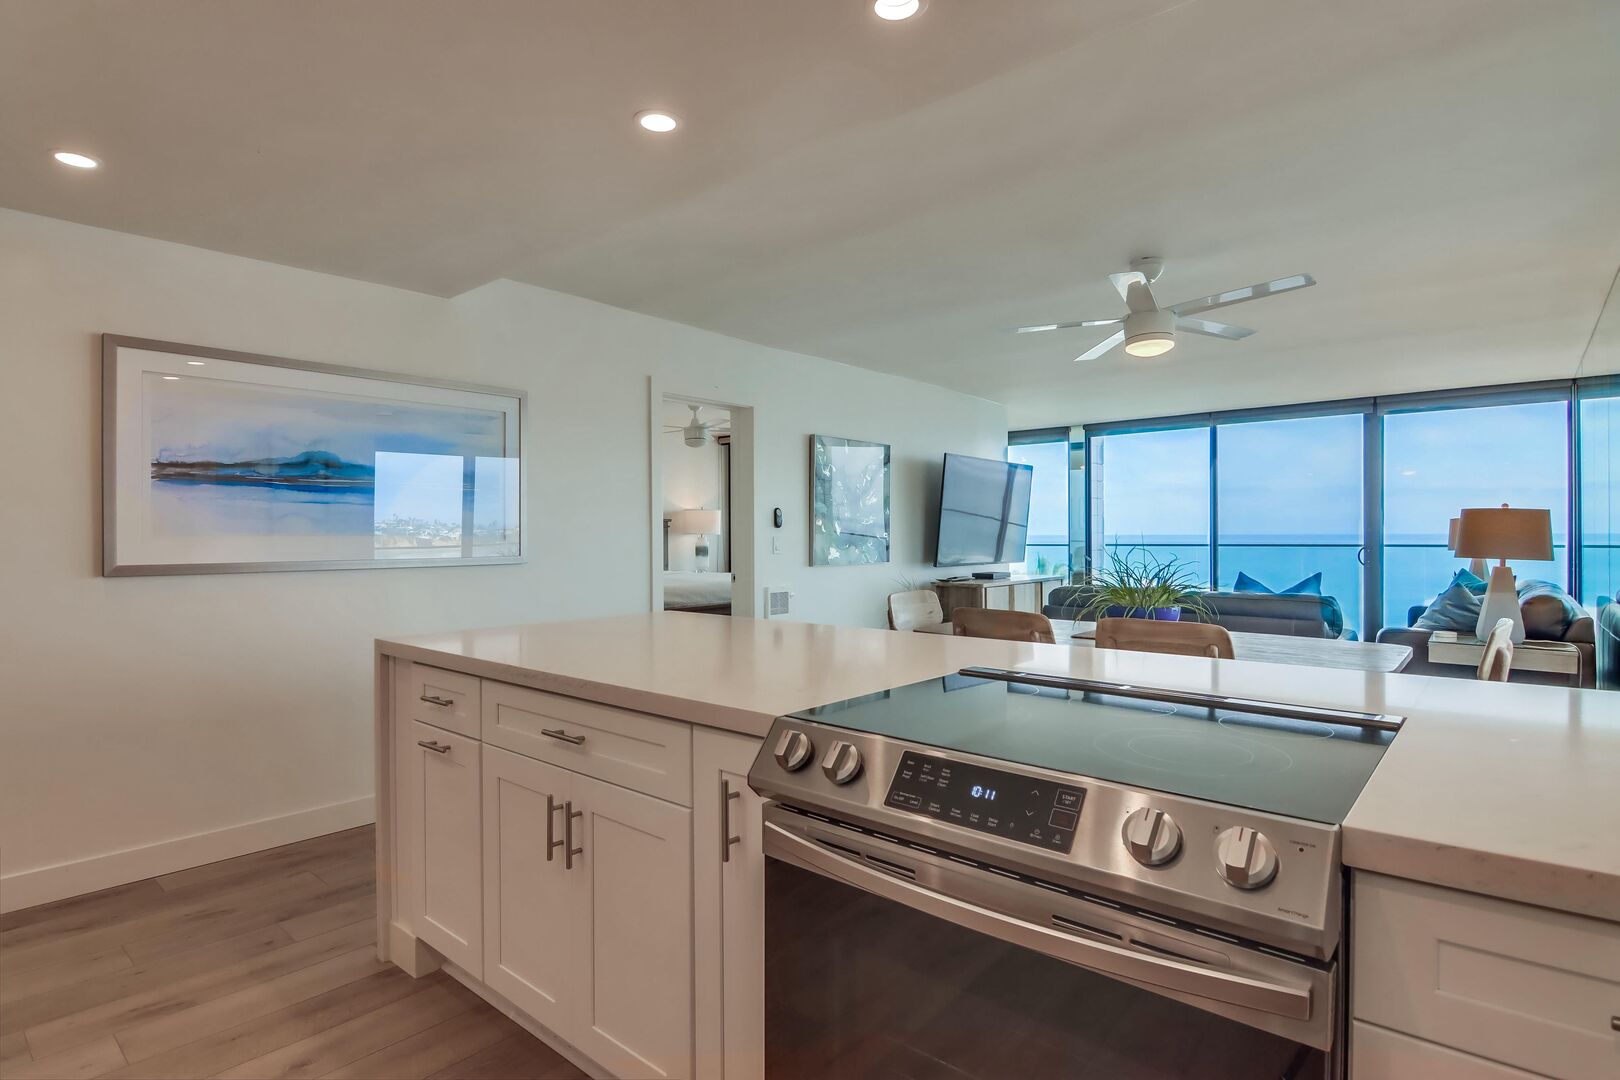 Quartzite countertops and stainless steel appliances. Cook meals at home with views of the ocean!